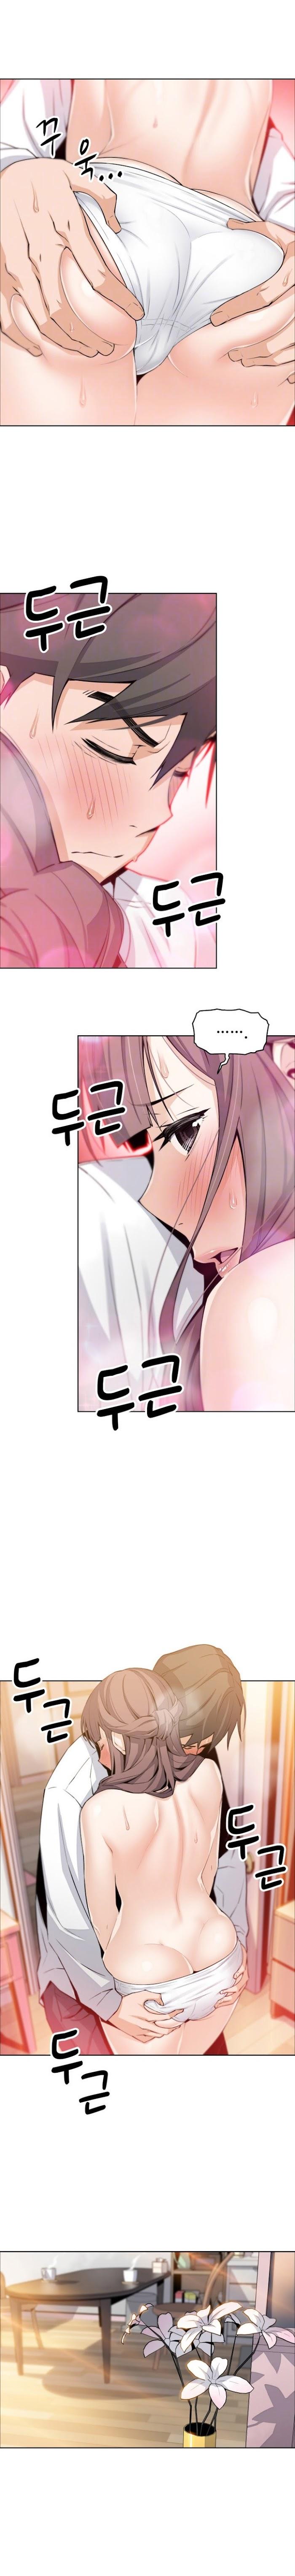 Housekeeper [Neck Pillow, Paper] Ch.49/49 [English] [Manhwa PDF] Completed 94